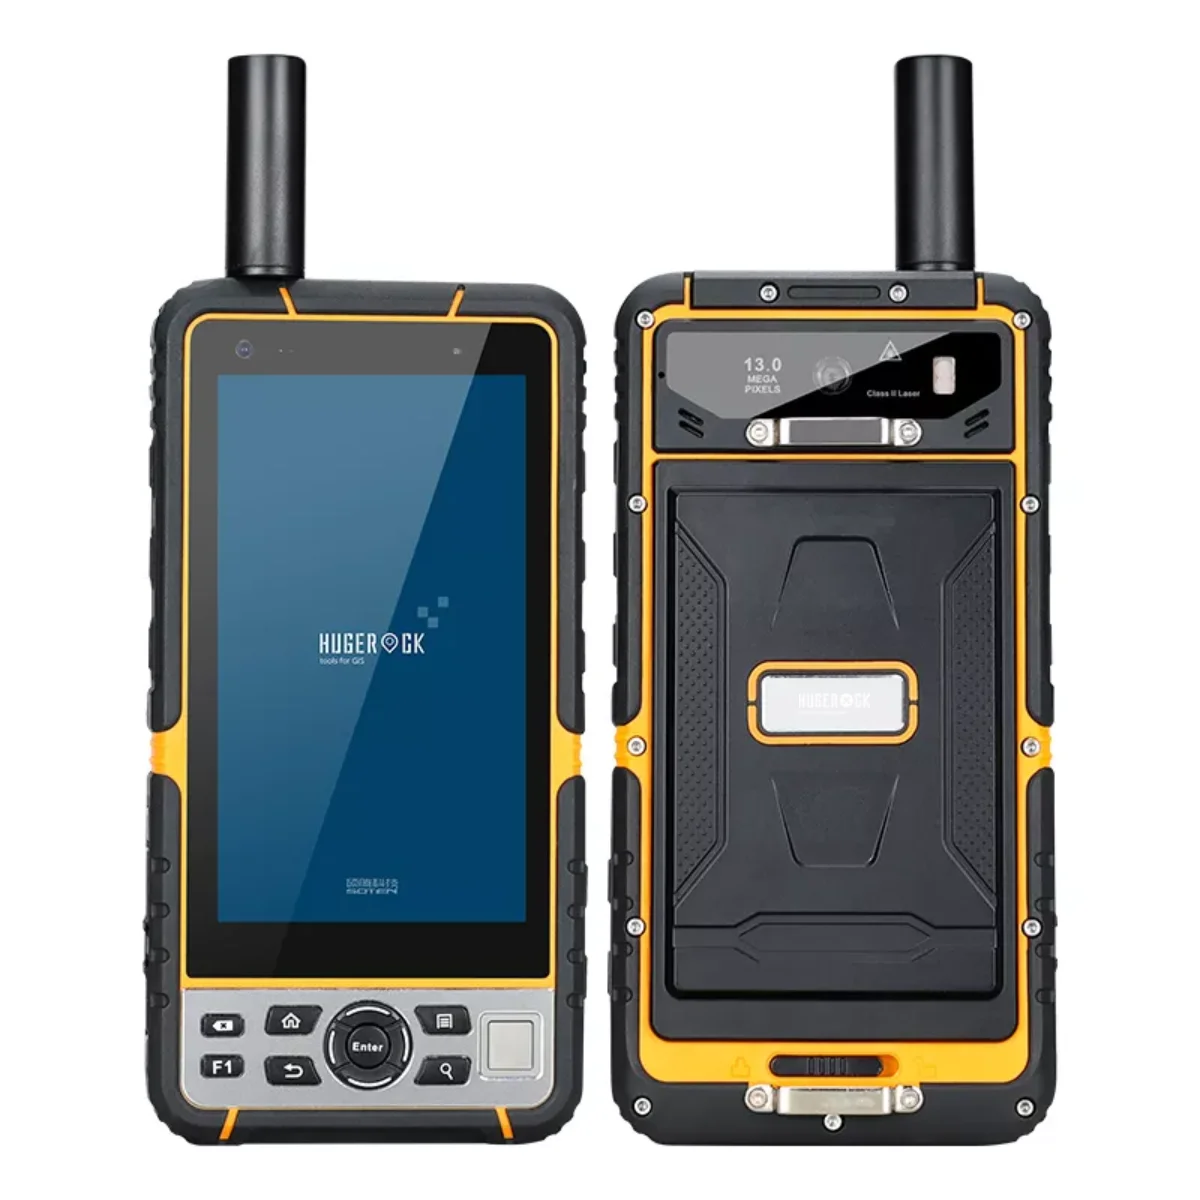 hugerock t60kg android 8 1 os ip65 military sim card tablet pda rugged mobile phone handheld free global shipping